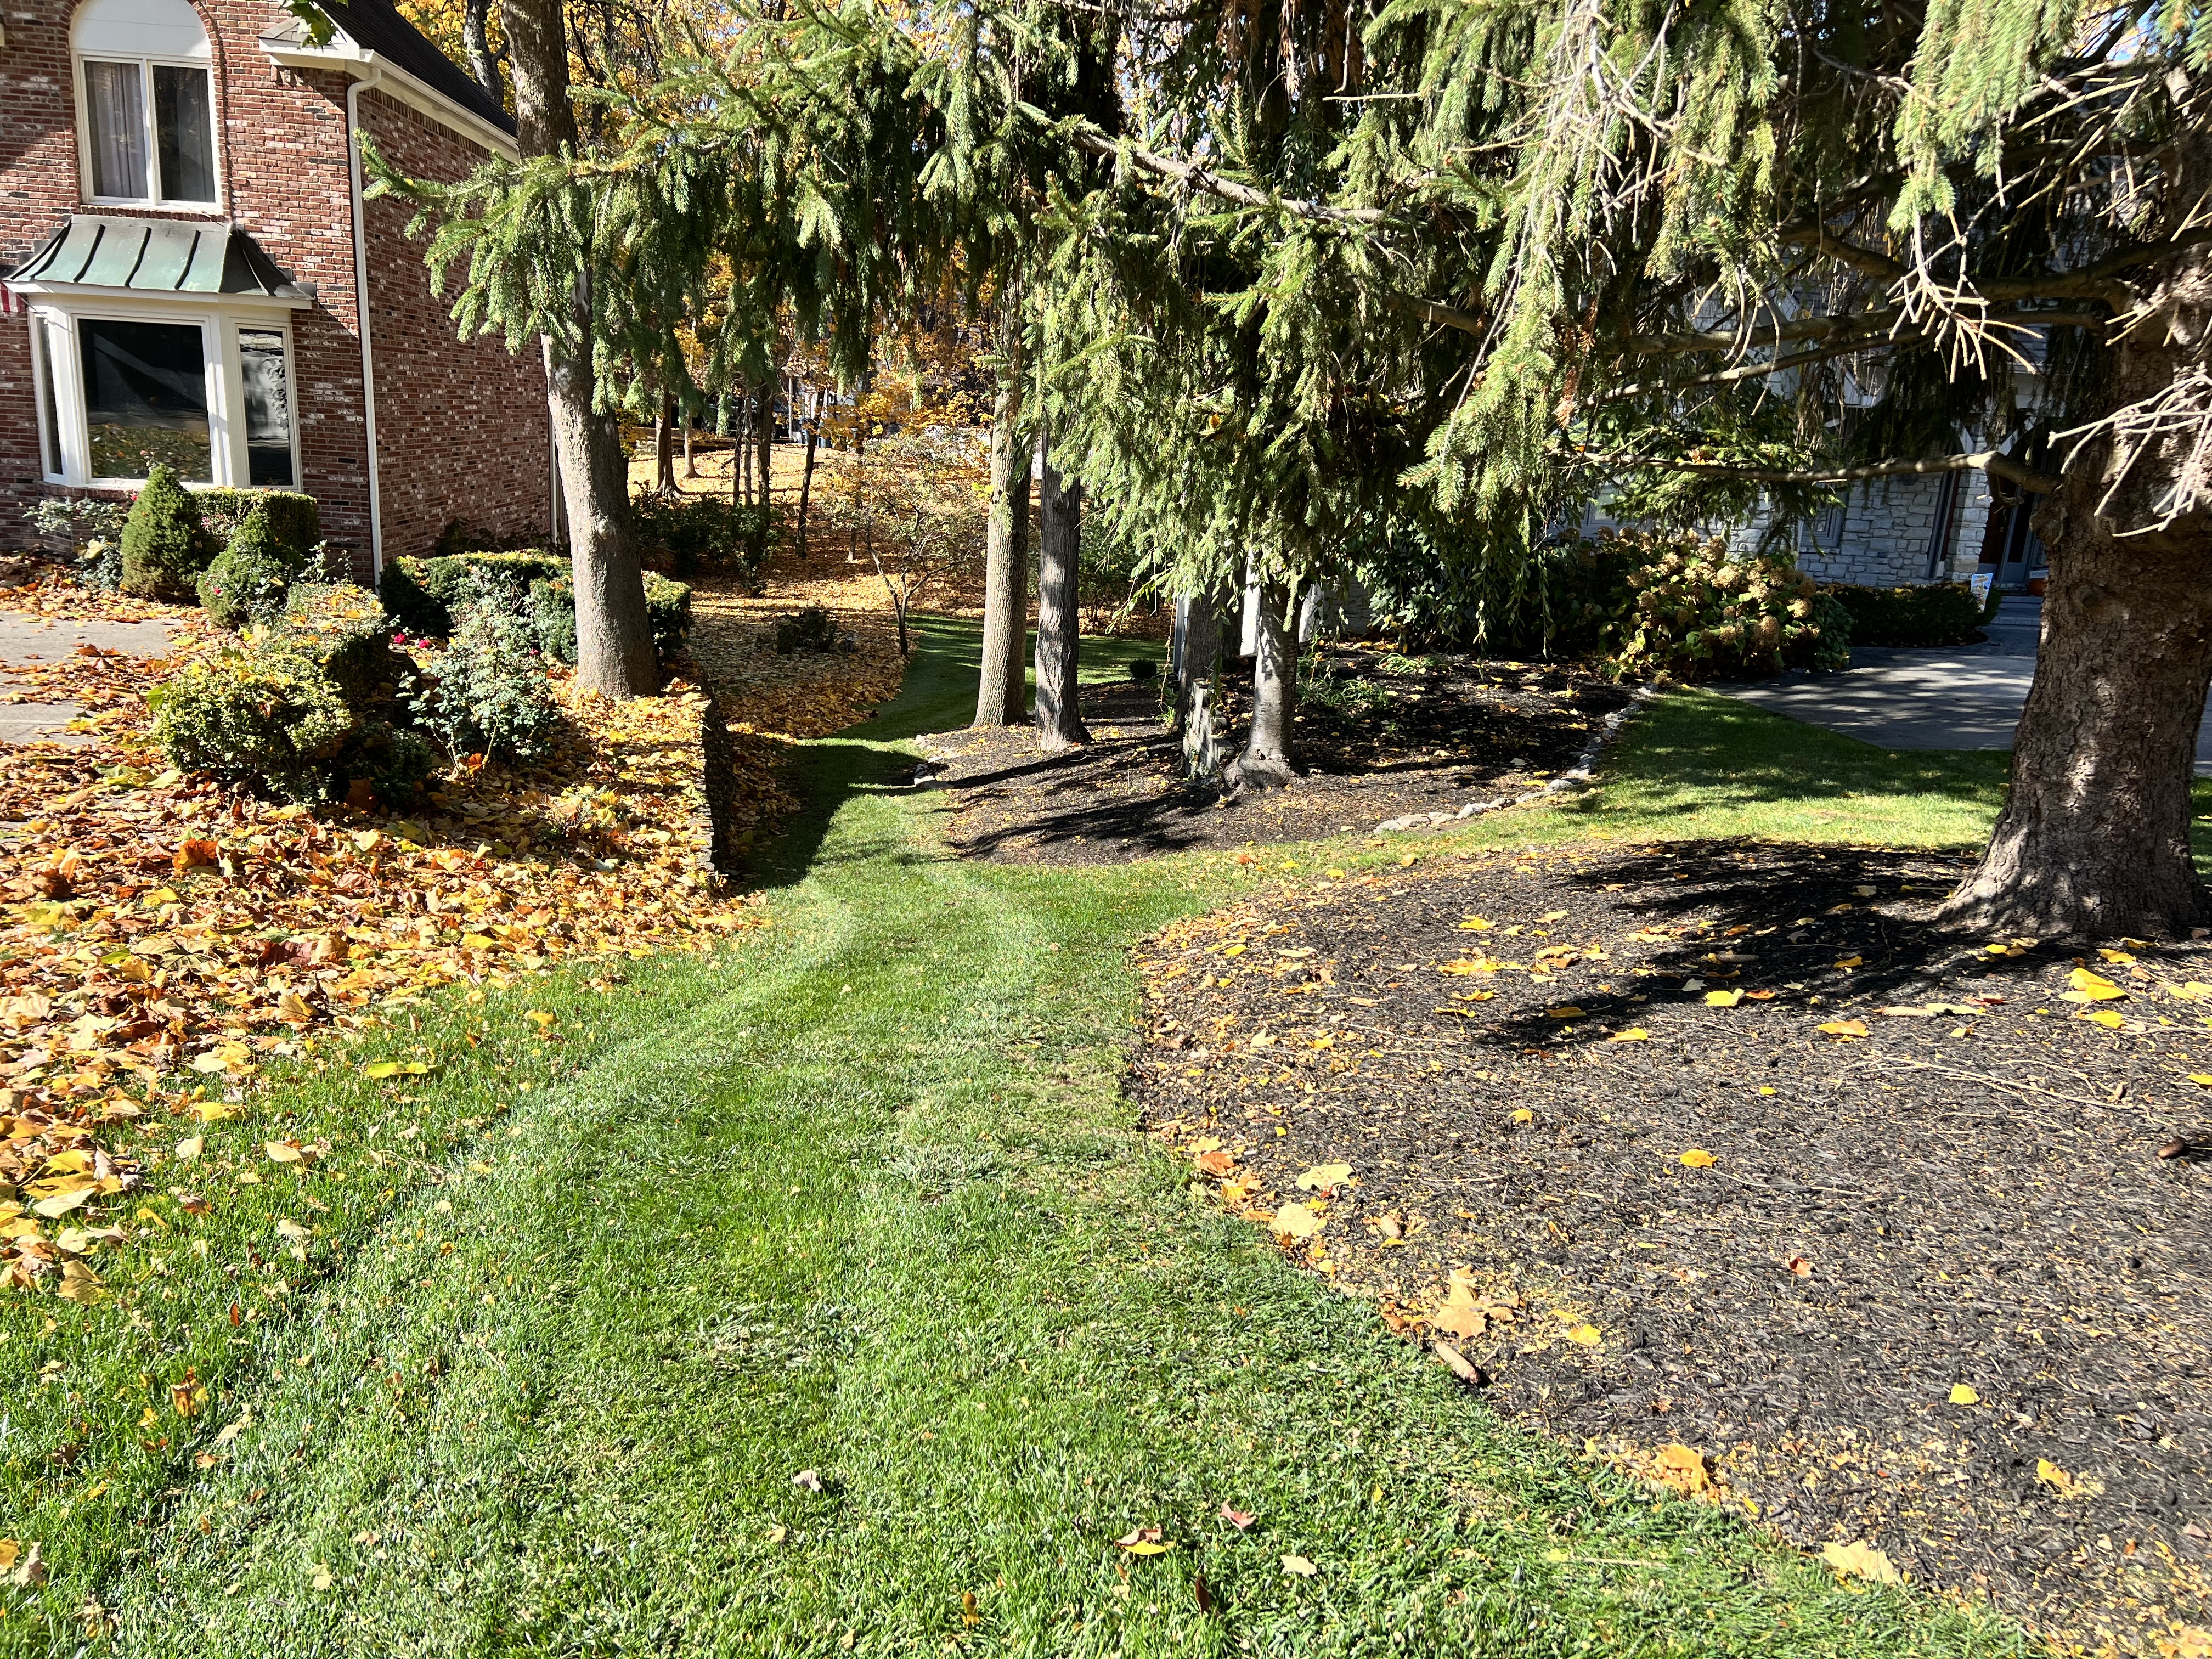 Lawn Care Service in Geist: Fall Clean Up Done Right